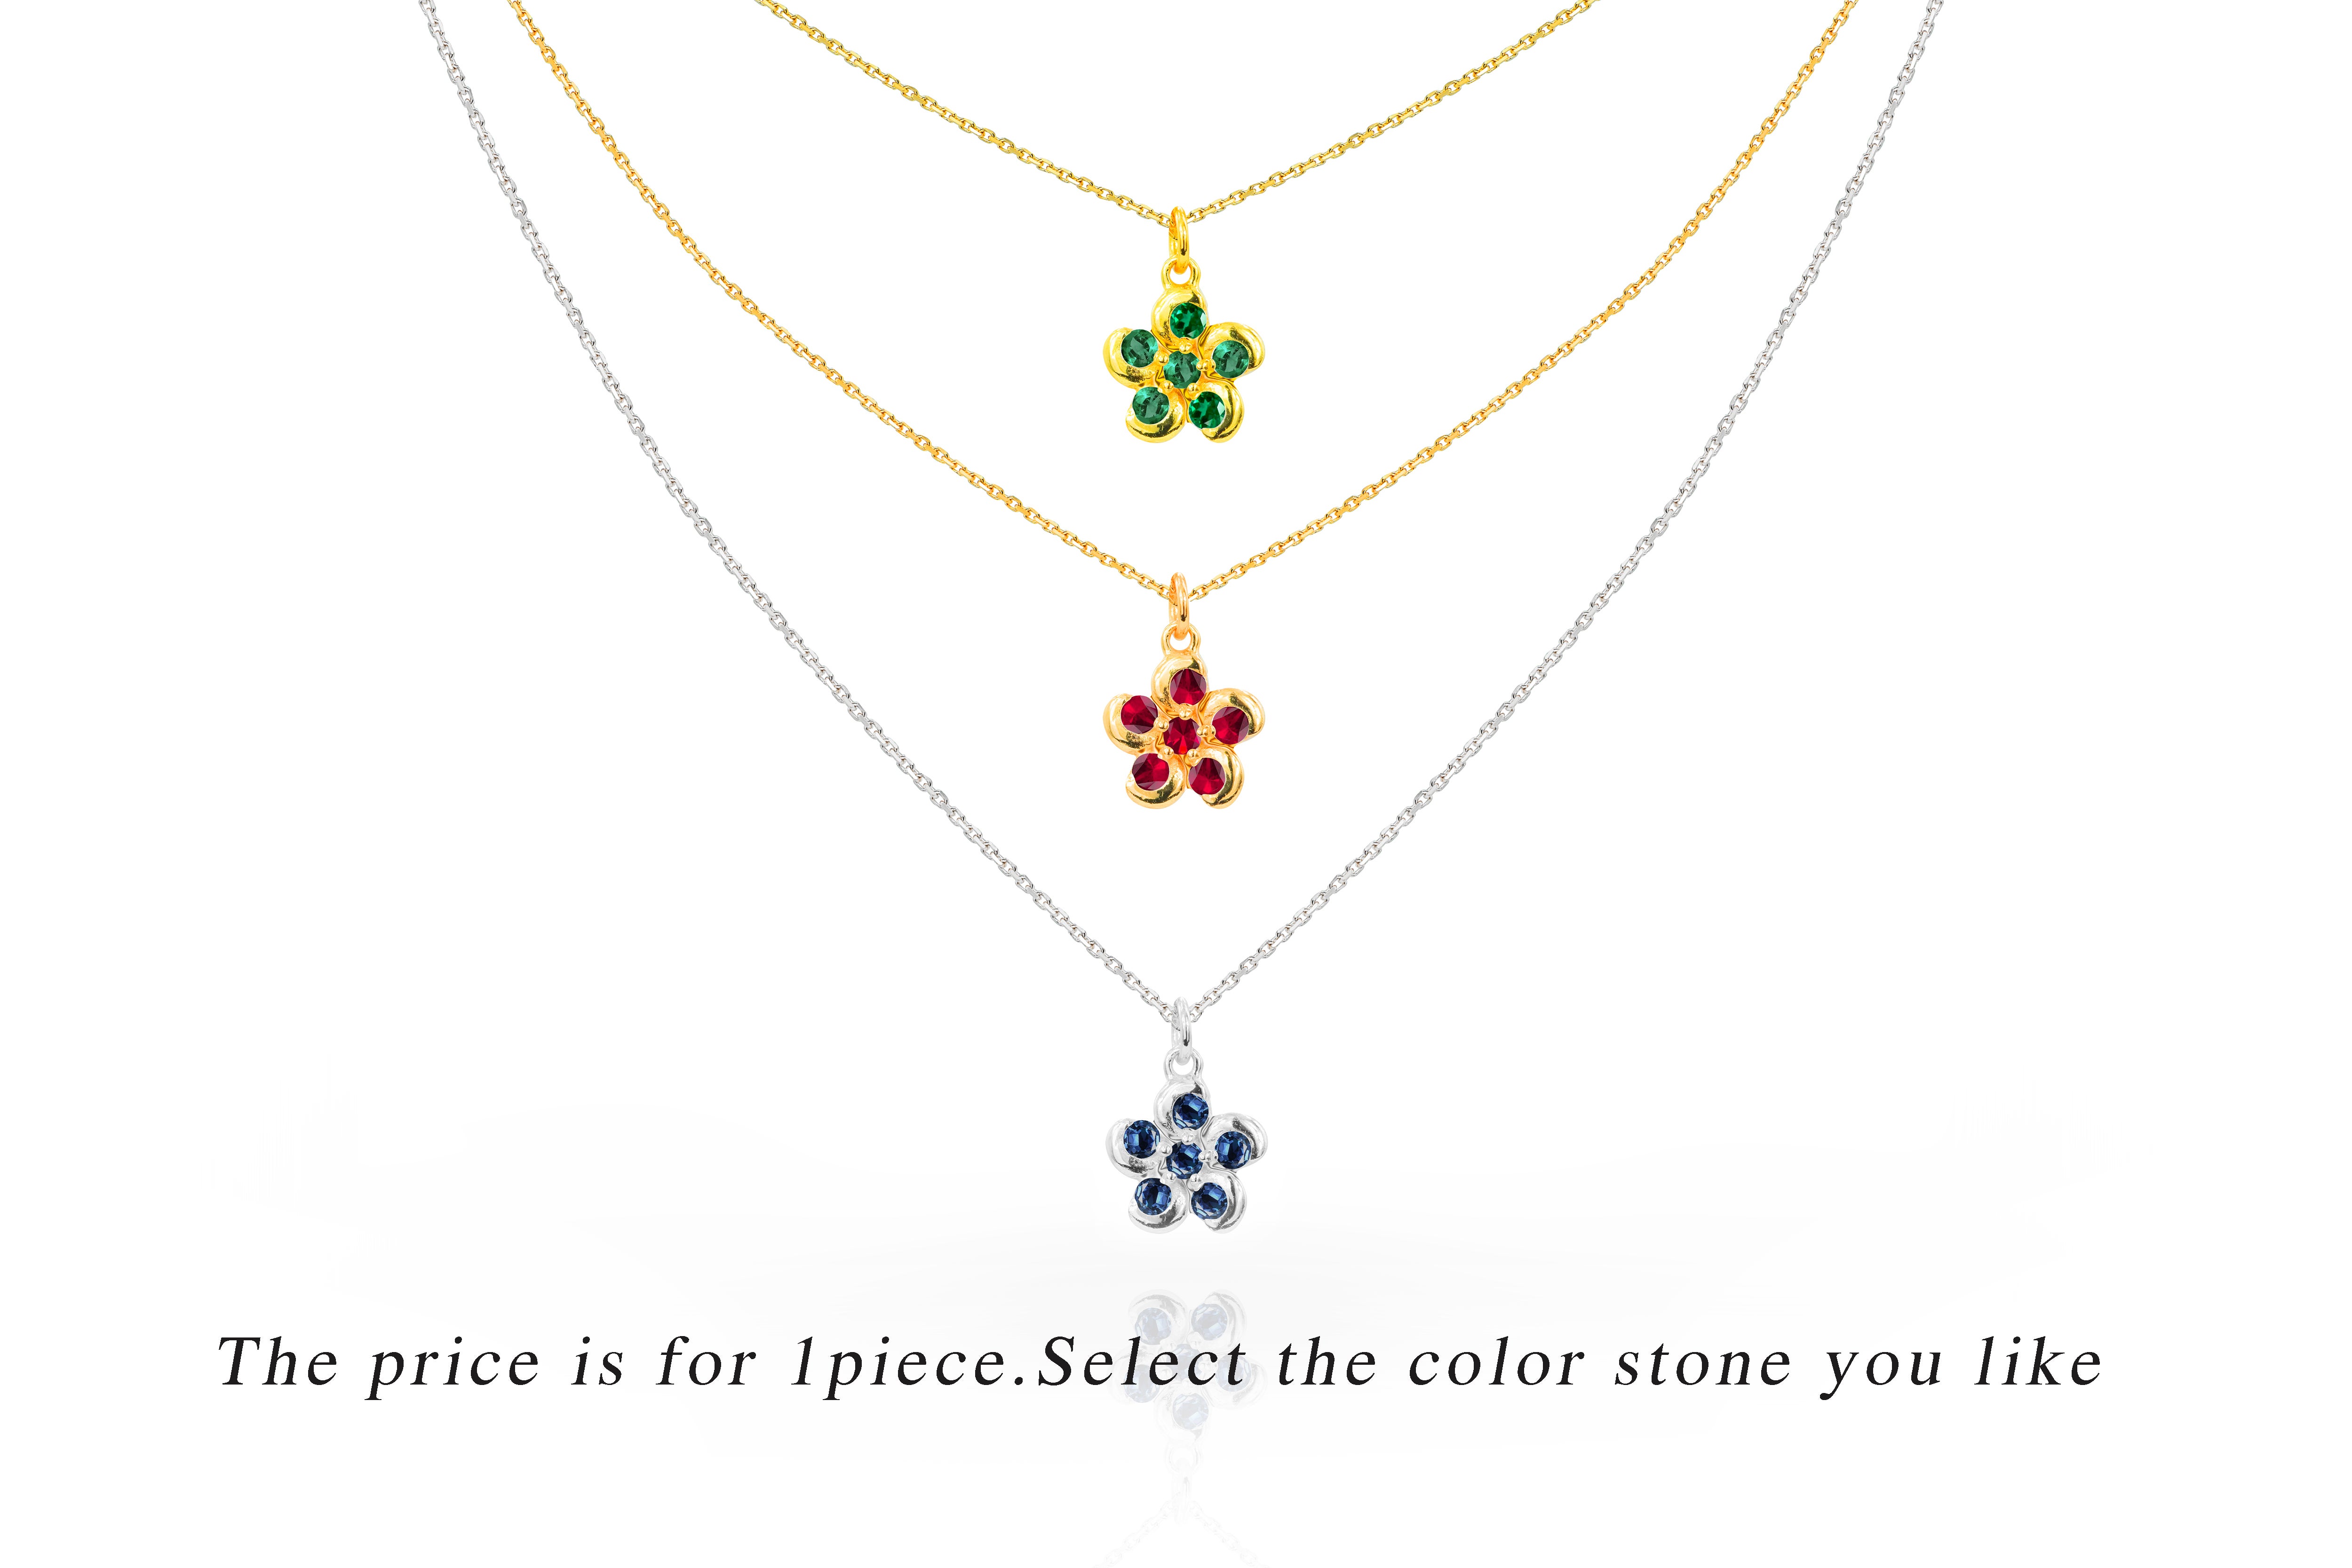 0.24 Ct Ruby, Sapphire and Emerald Flower Necklace in 18K Gold